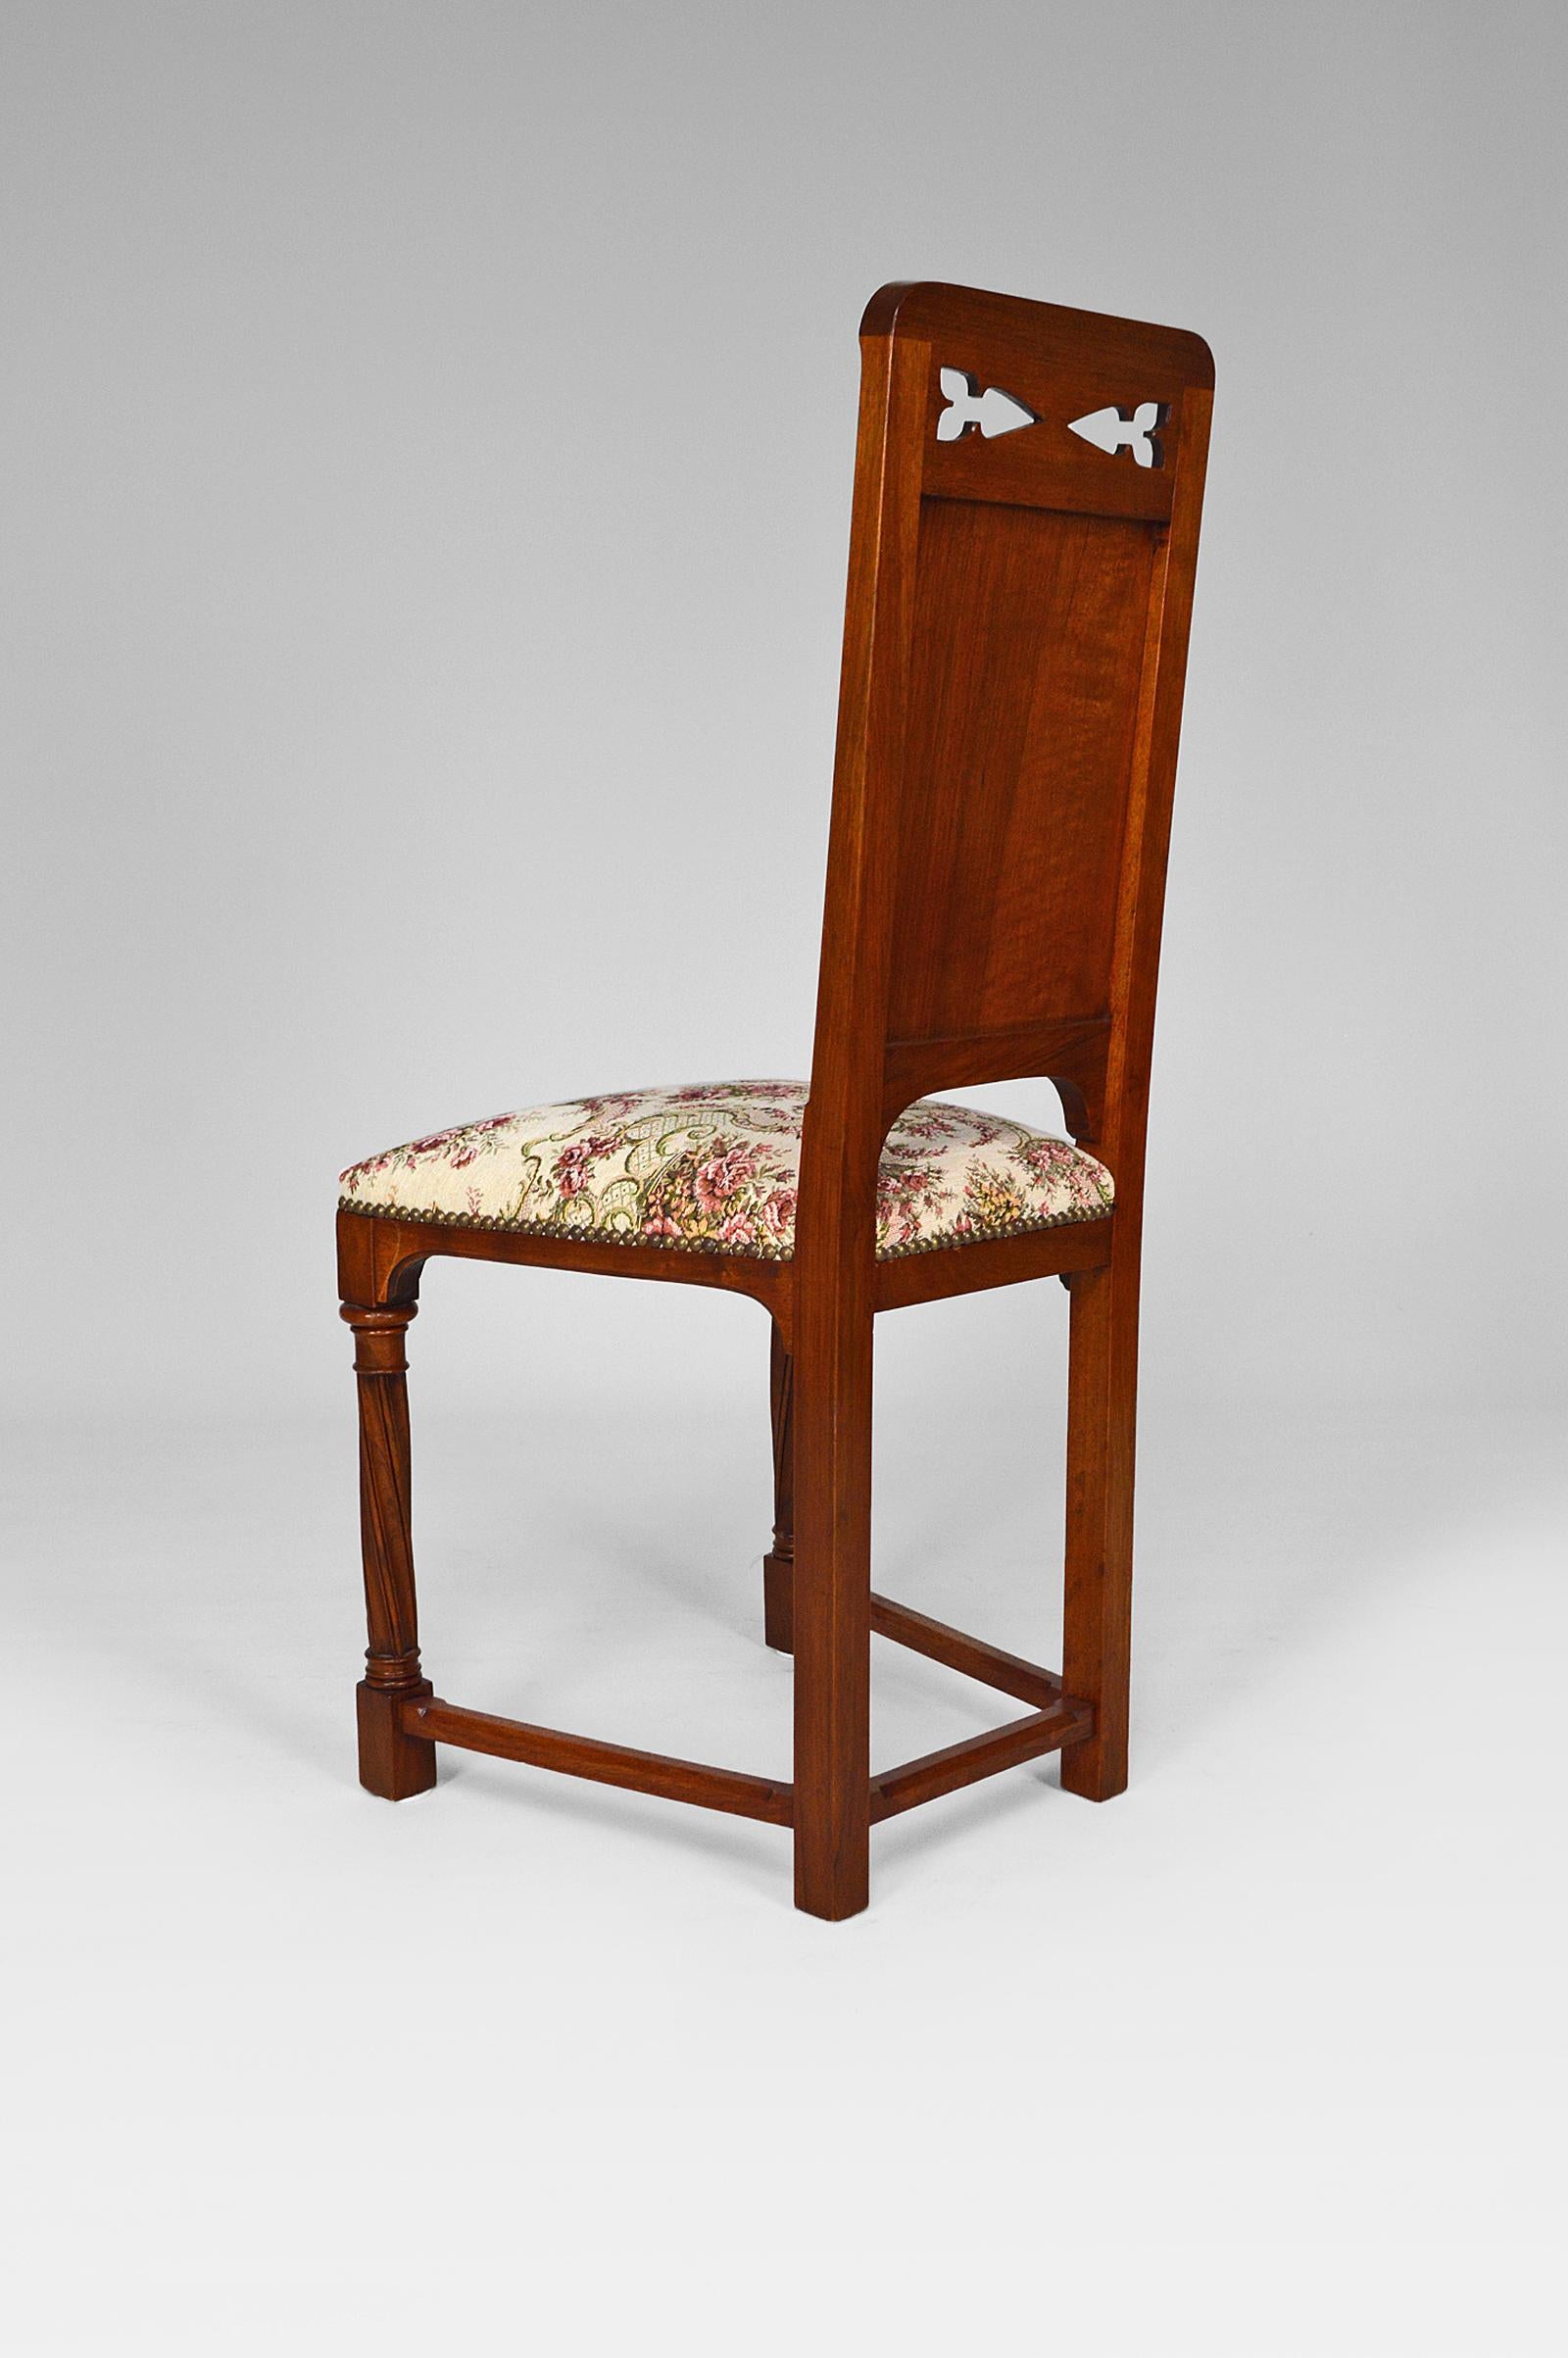 Pair of Antique Victorian Gothic Revival Chairs in Carved Walnut, 19th Century For Sale 3